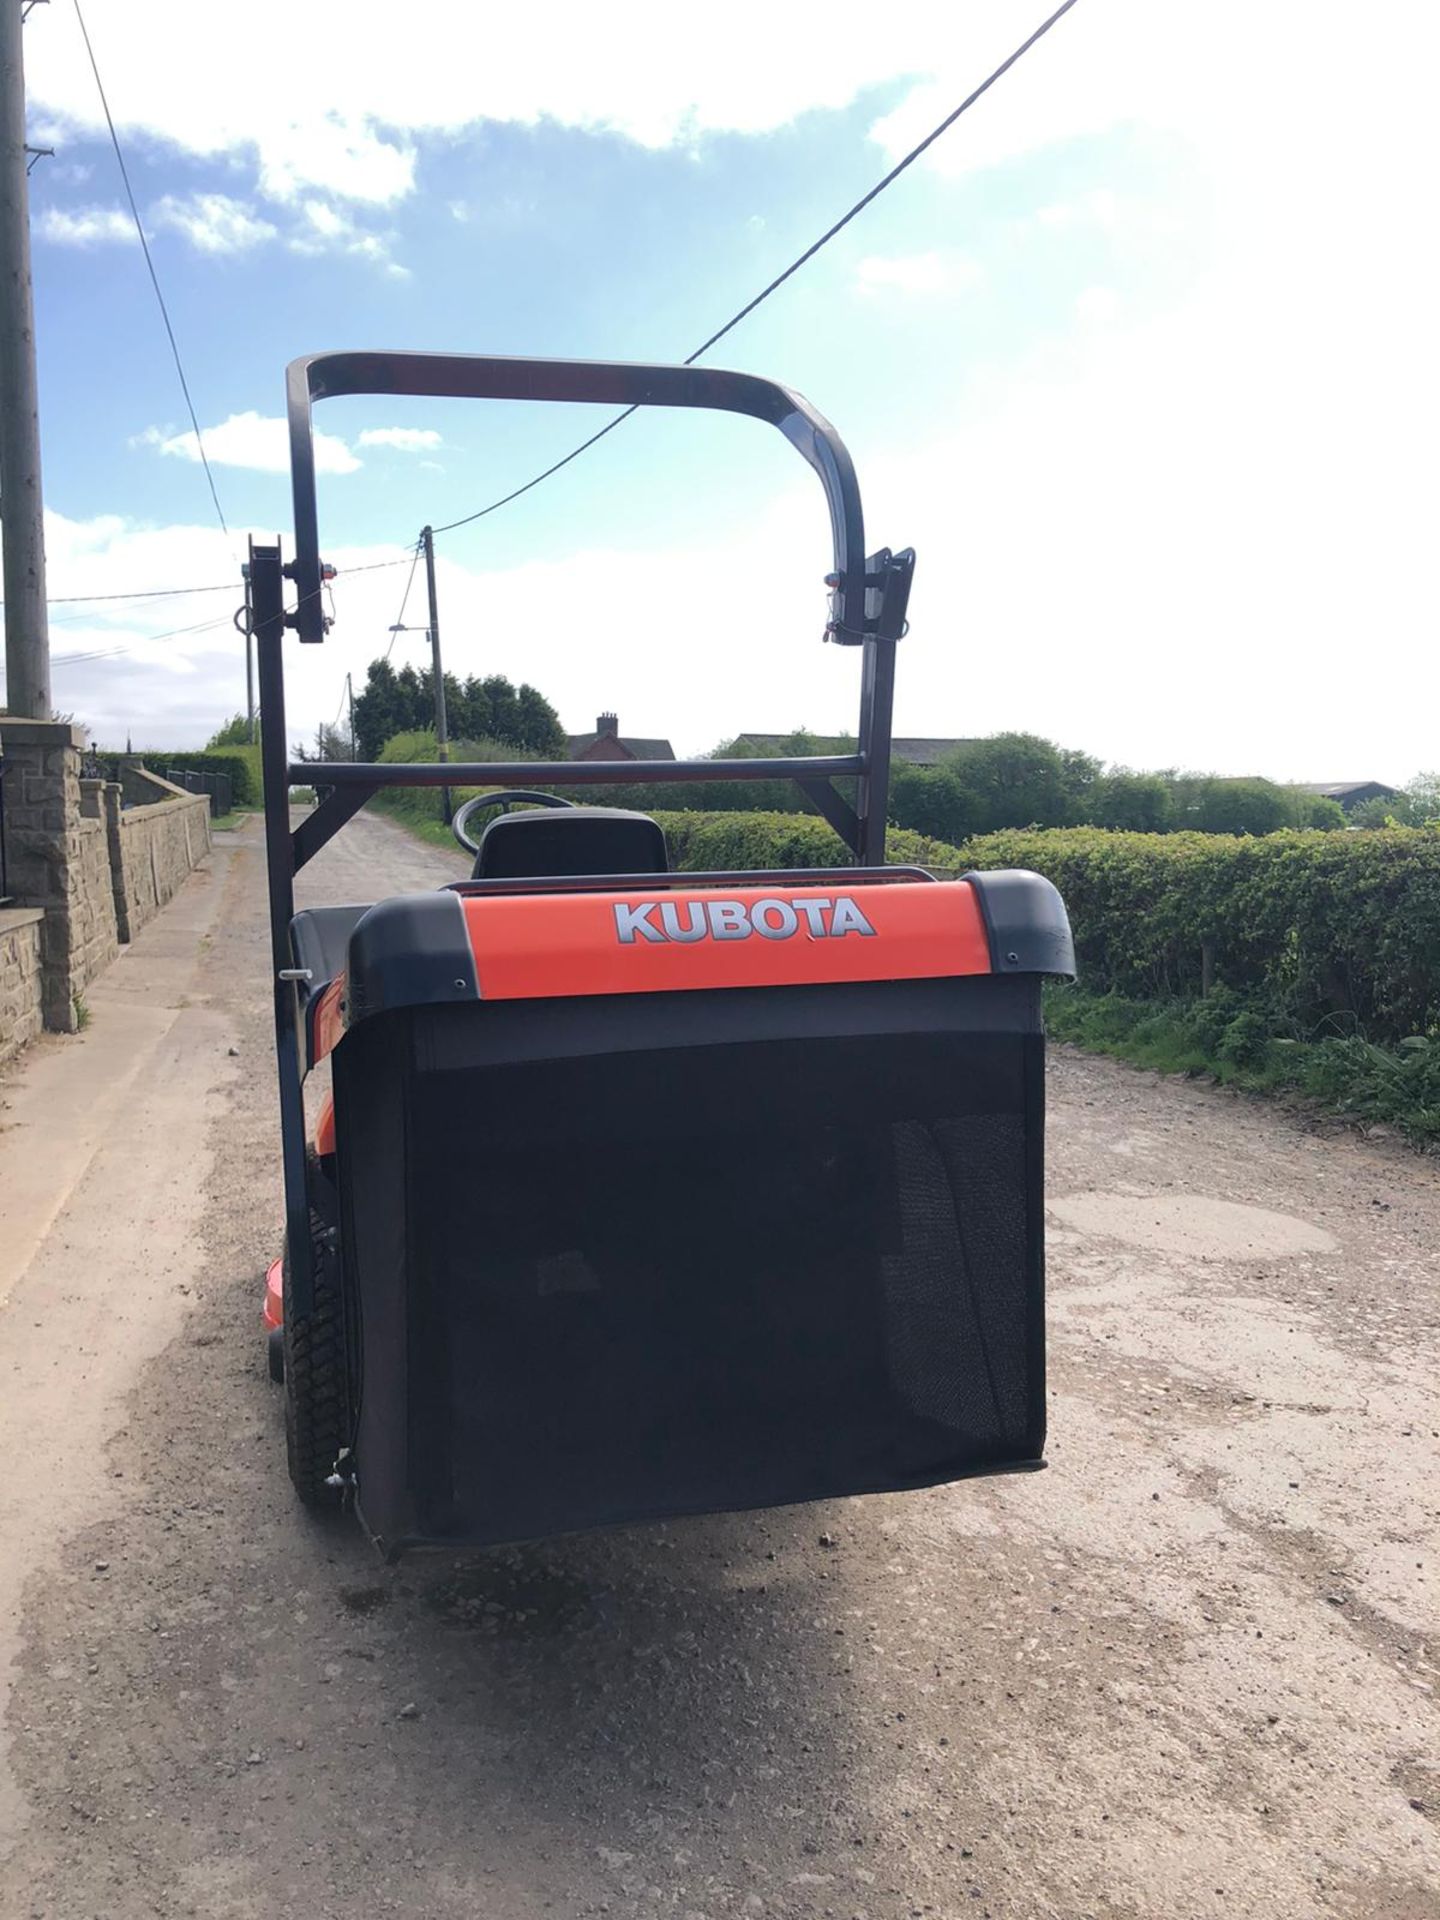 S - EX DEMO KUBOTA G23-11 RIDE ON LAWN MOWER - ONLY 30 HOURS FROM NEW, IN VERY GOOD CONDITION - Image 5 of 10